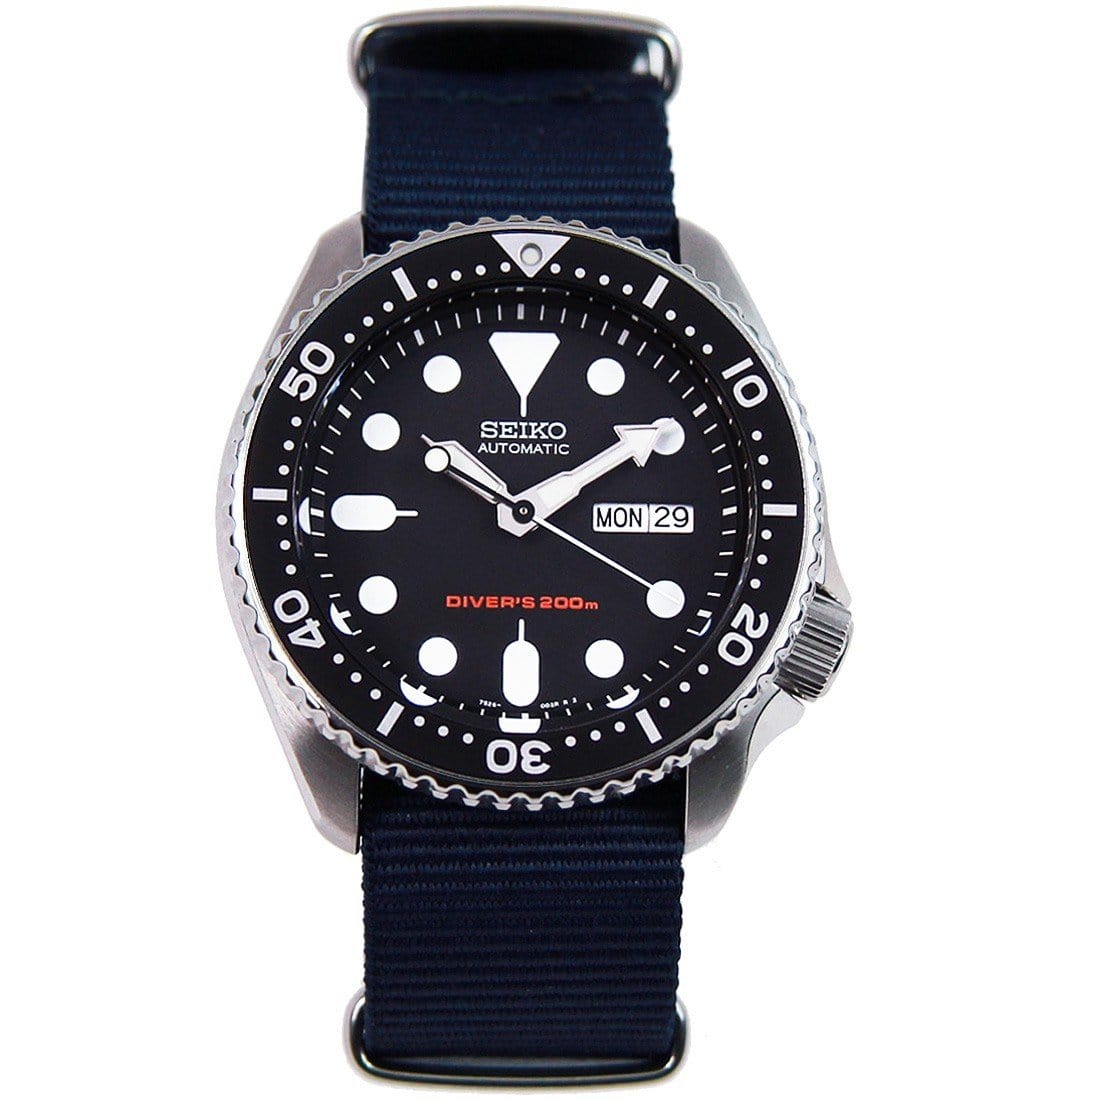 SKX007K2 SKX007 Seiko Automatic Analog Mens Dive Watch with Extra Strap